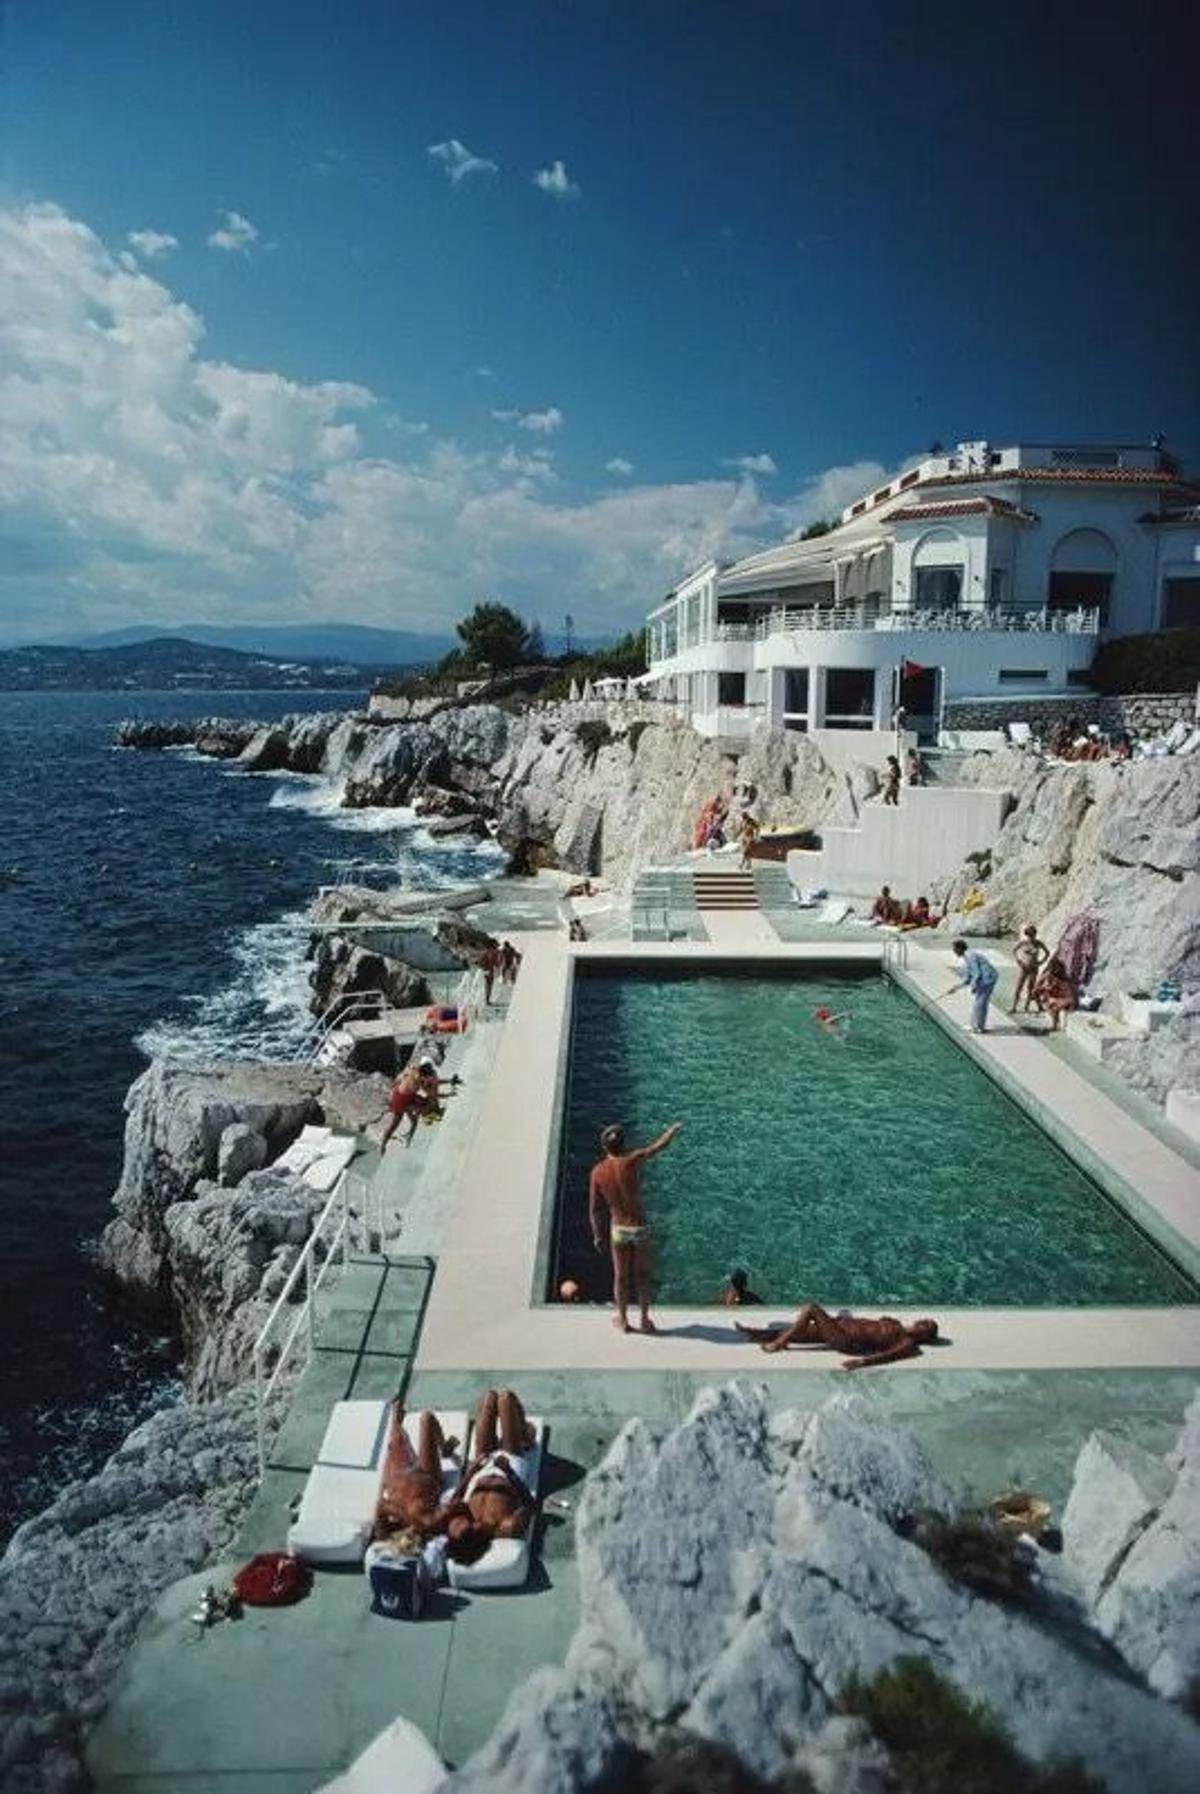 Eden-Roc Pool 
1976
by Slim Aarons

printed 2024
Slim Aarons Limited Estate Edition

Guests round the swimming pool at the Hotel du Cap Eden-Roc, Antibes, France, August 1976.
 
unframed
c type print
Very large 72 × 48″ inches / 183 x 122 cm paper